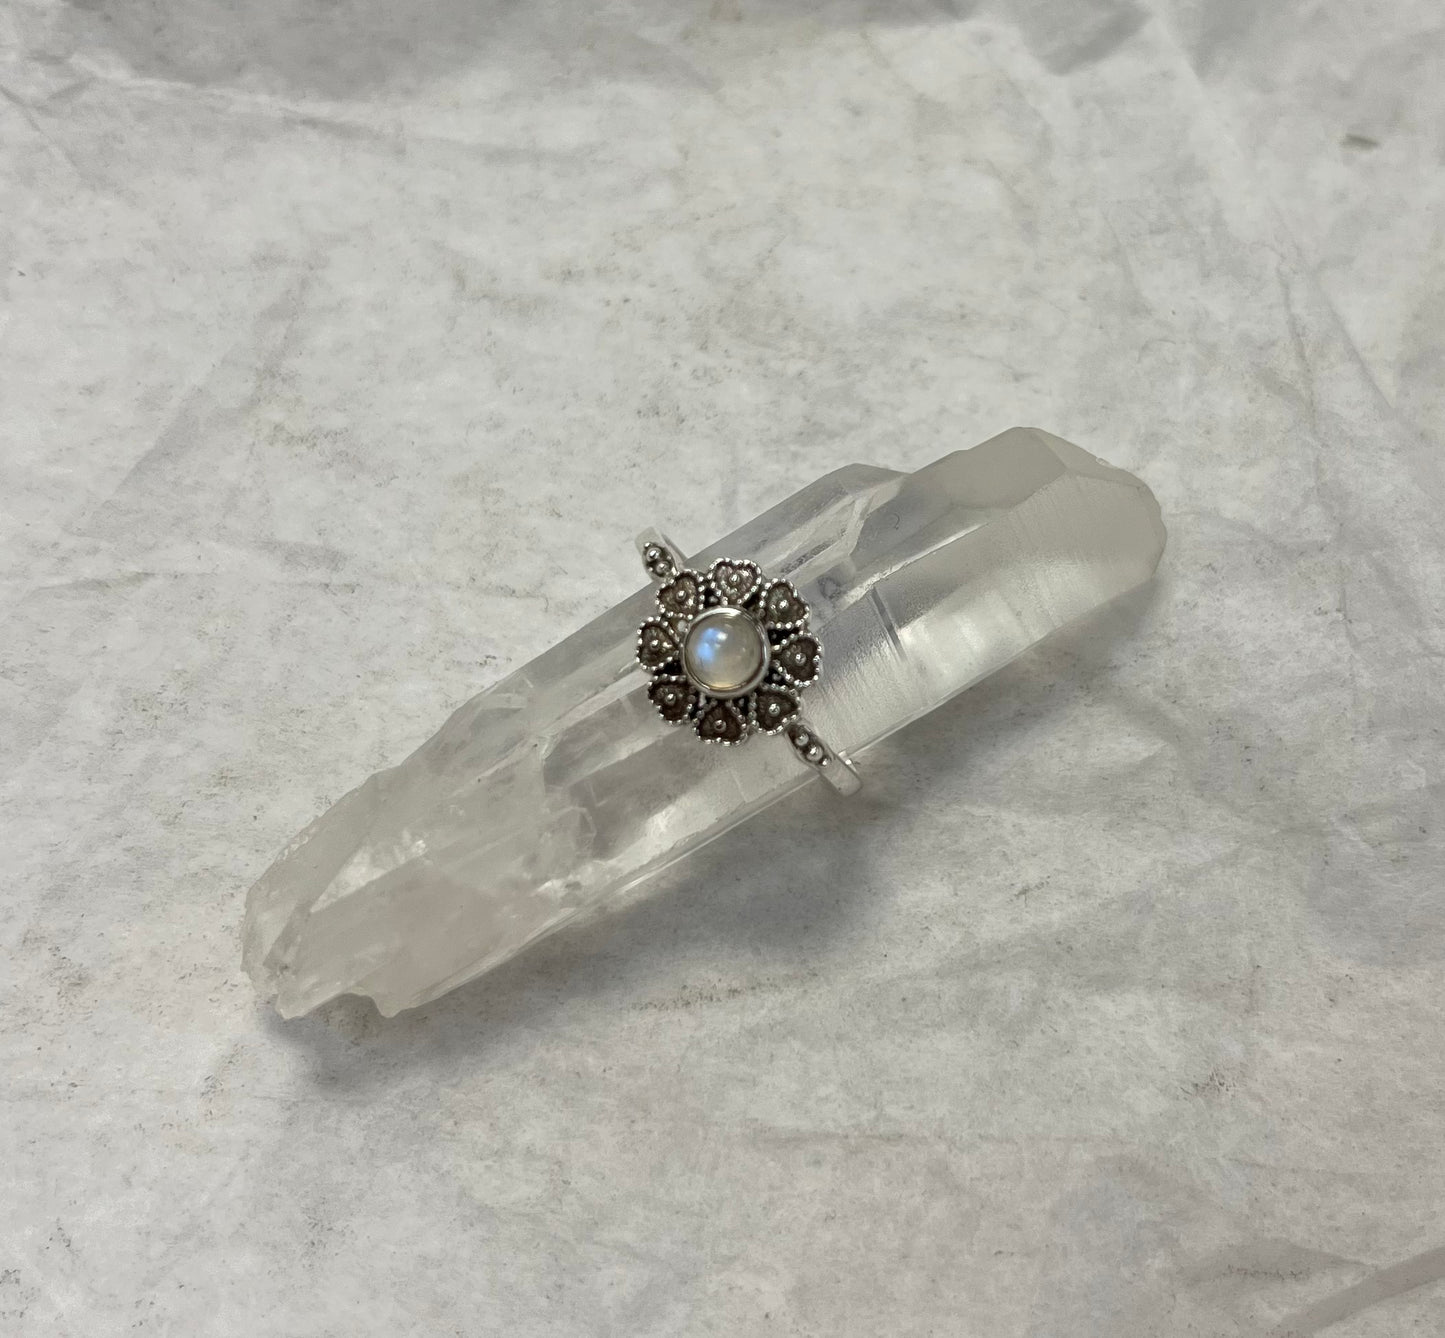 Silver Ring - Heart Shaped Petals with Stone Centre